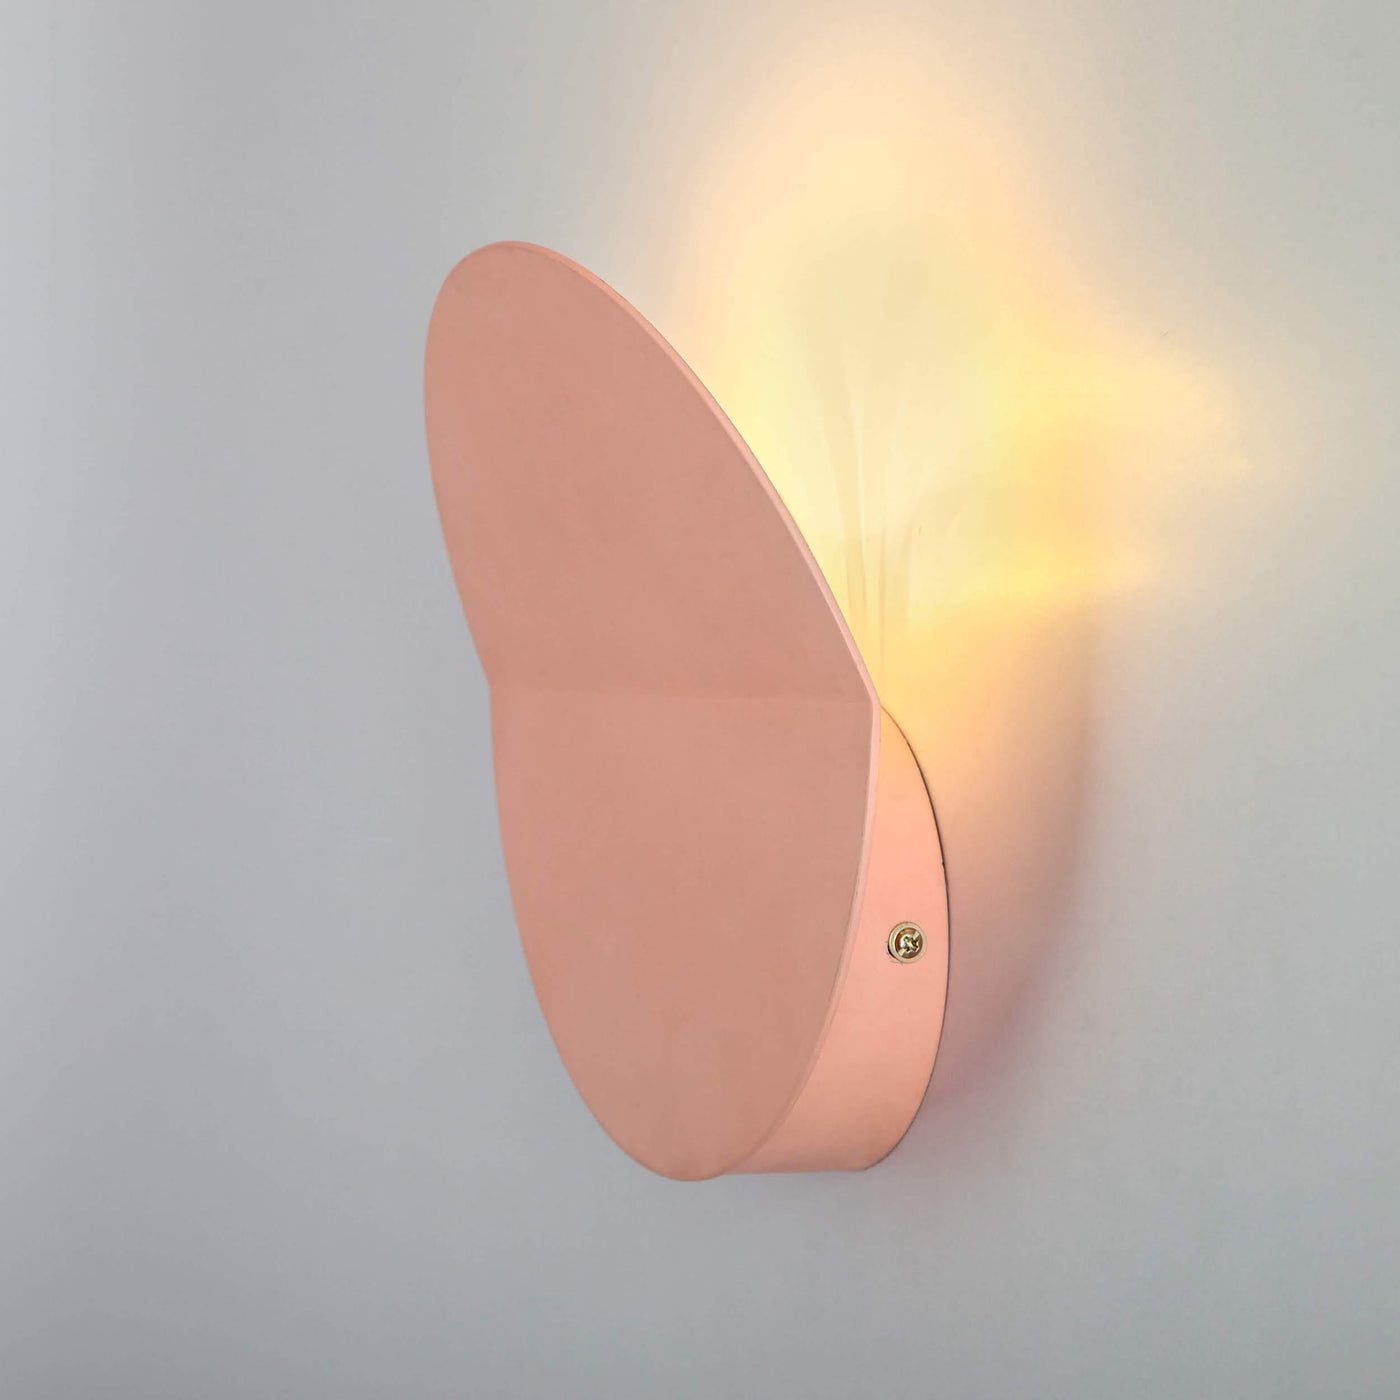 Houseof Diffuser Wall Light. British design at someday designs. #colour_pink